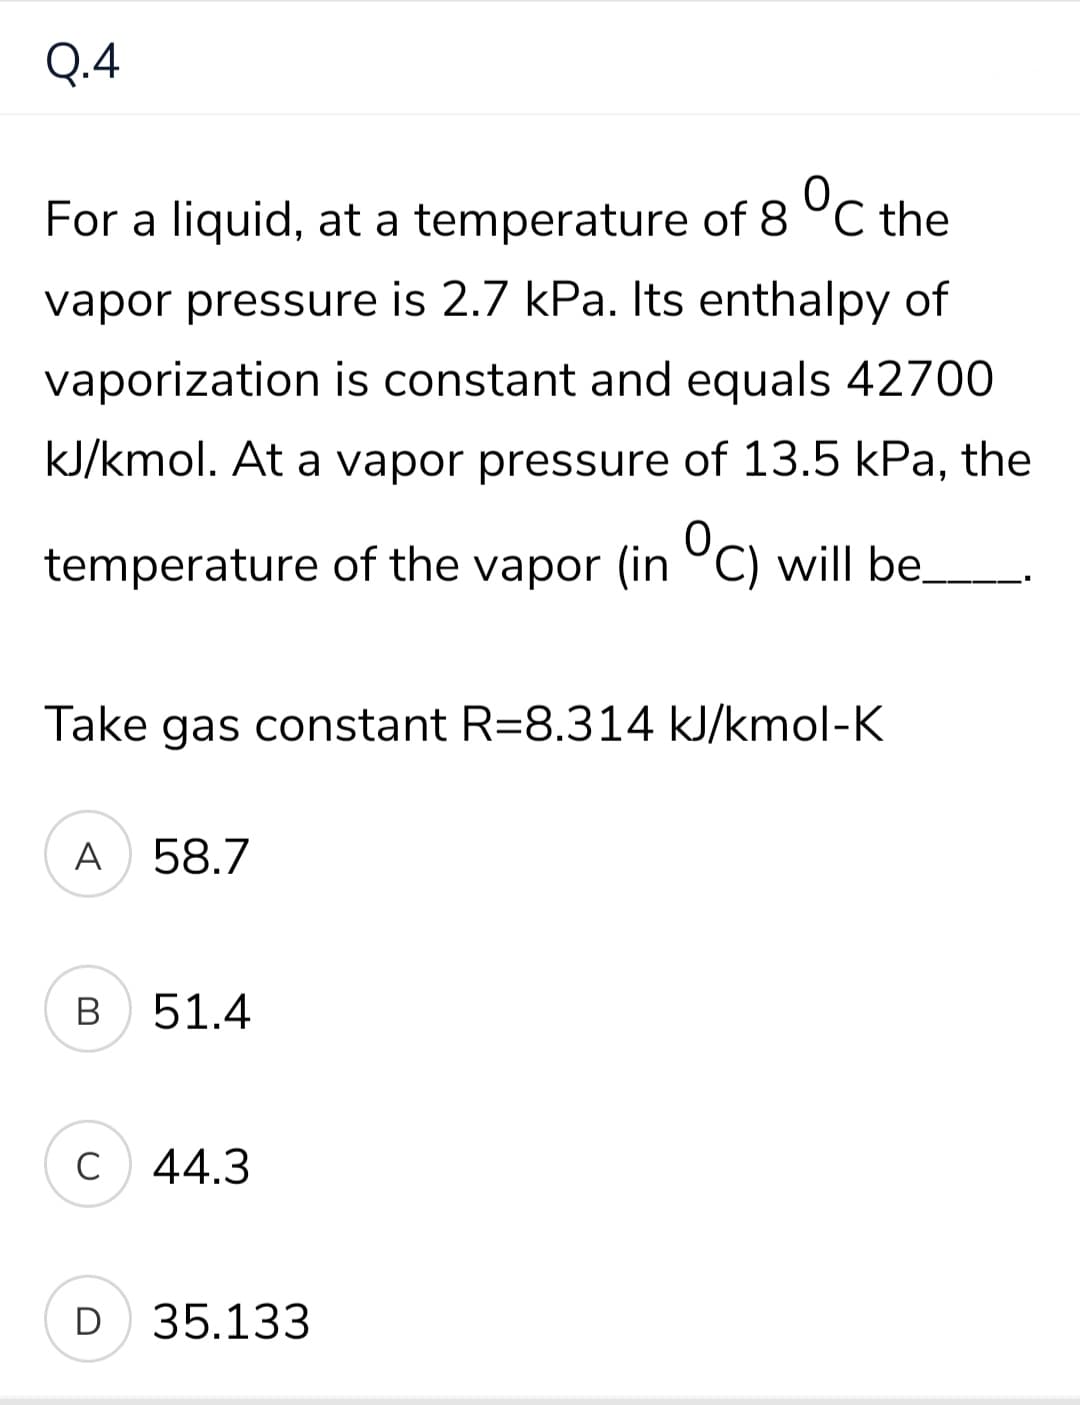 Q.4
For a liquid, at a temperature of 8 °C the
vapor pressure is 2.7 kPa. Its enthalpy of
vaporization is constant and equals 42700
kJ/kmol. At a vapor pressure of 13.5 kPa, the
0,
temperature of the vapor (in °C) will be.
Take gas constant R=8.314 kJ/kmol-K
A 58.7
B
51.4
C
44.3
D 35.133
